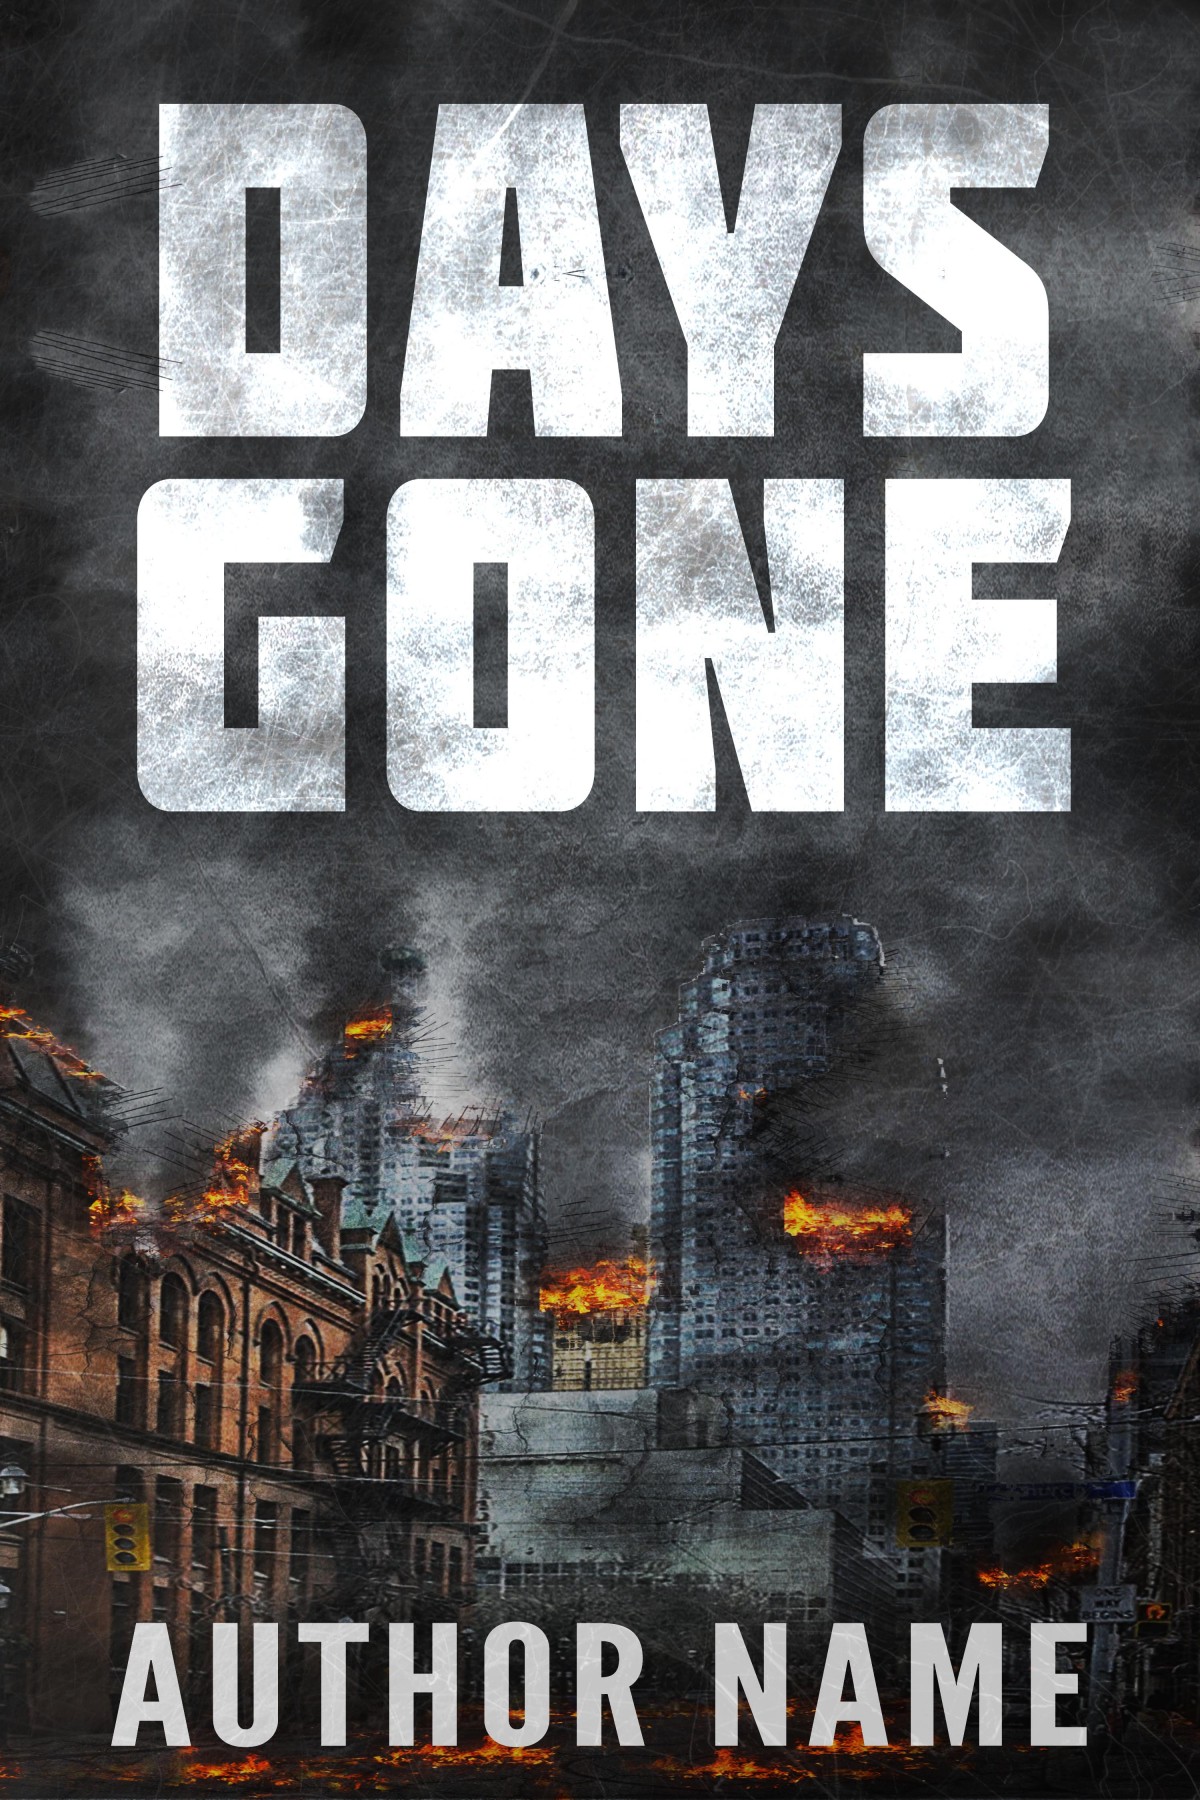 Days Gone' Review: Books and Their Covers